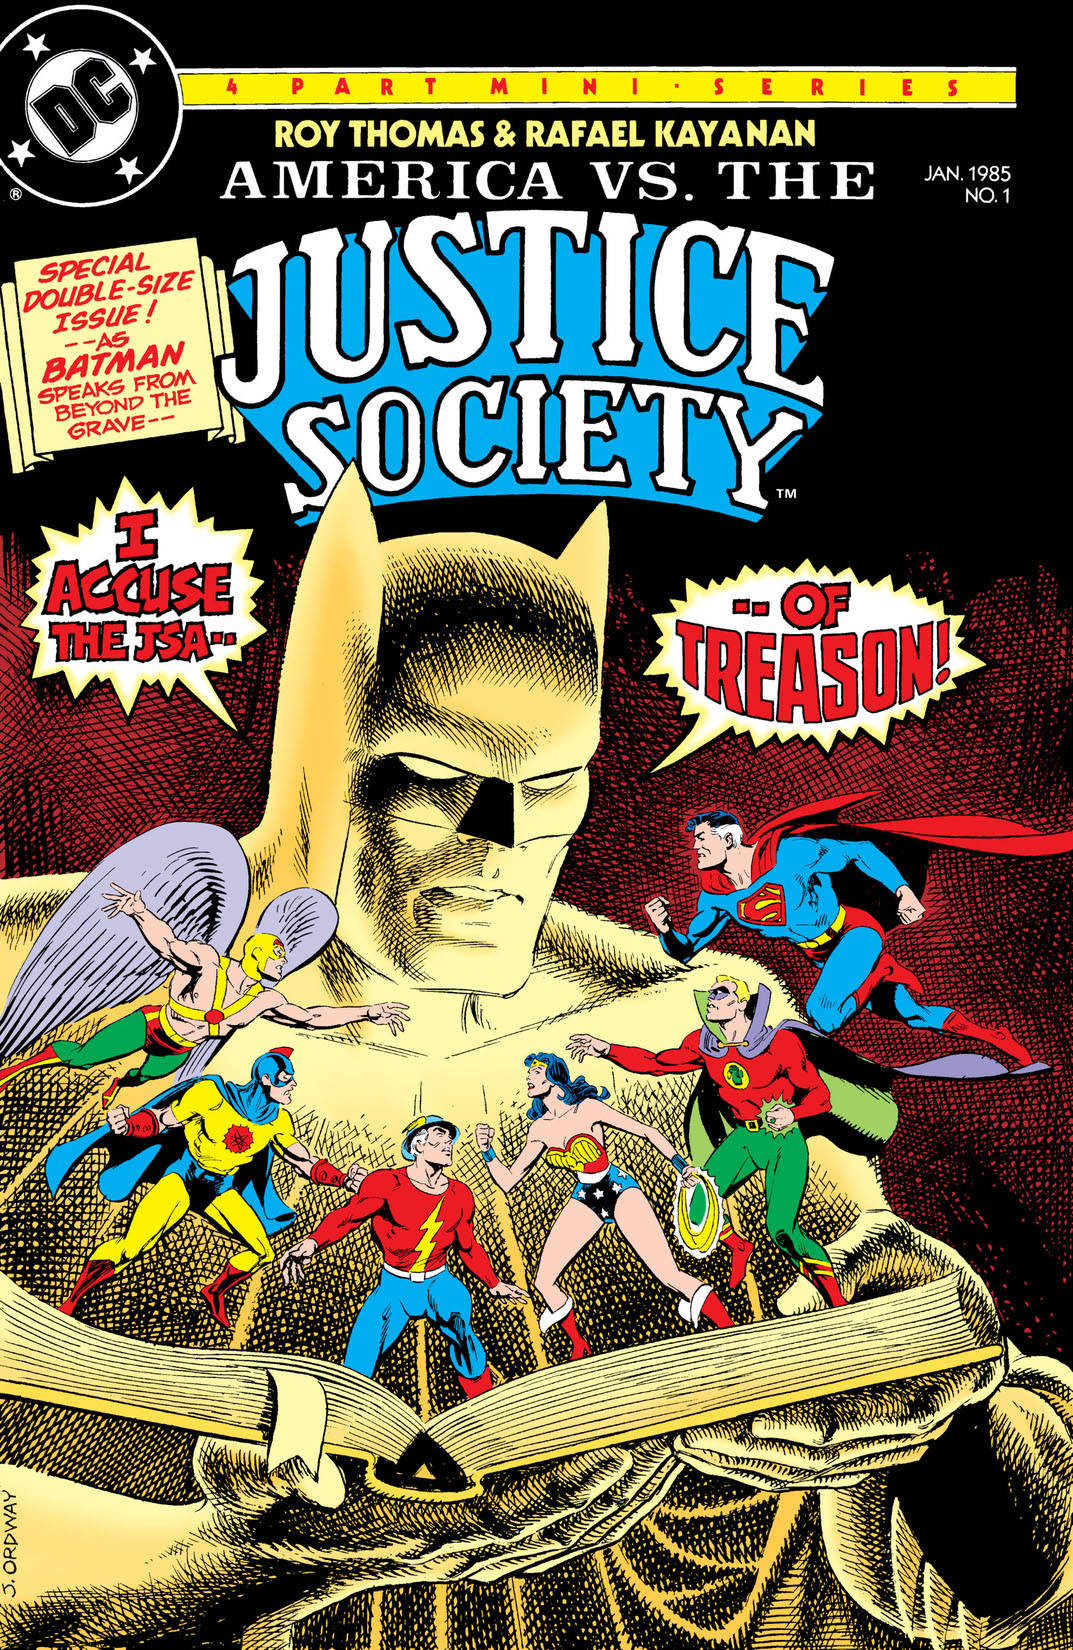 America vs. The Justice Society #1 preview images